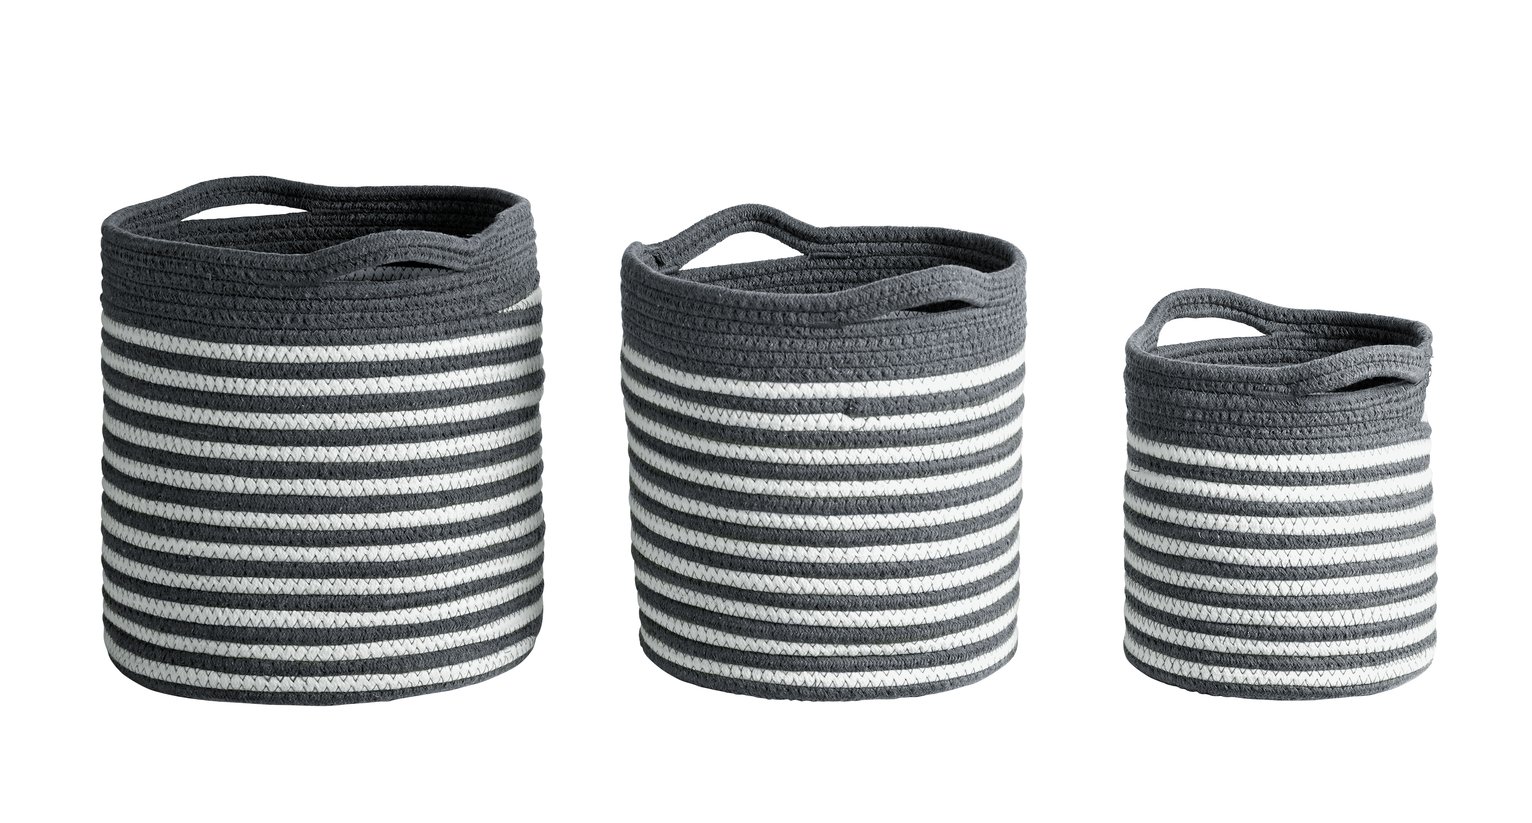 Argos Home Set of 3 Rope Storage Baskets - Grey and White